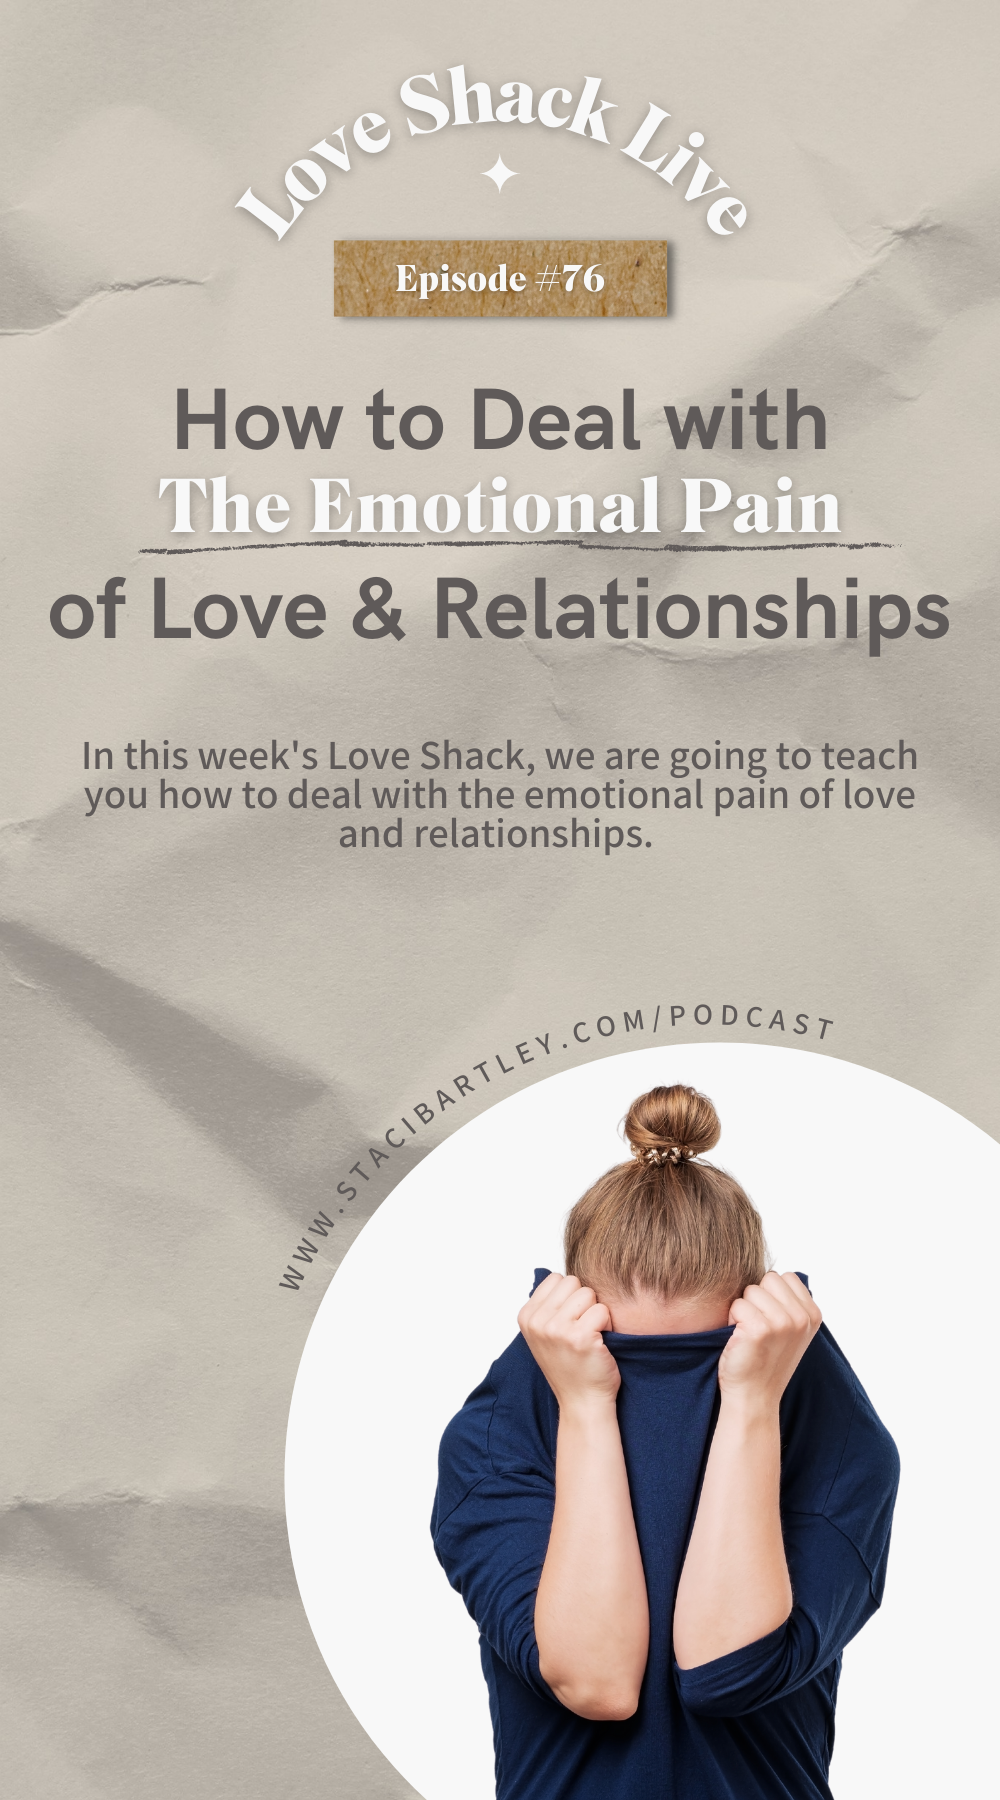 In this week's Love Shack, we are going to teach you how to deal with the emotional pain of love and relationships.